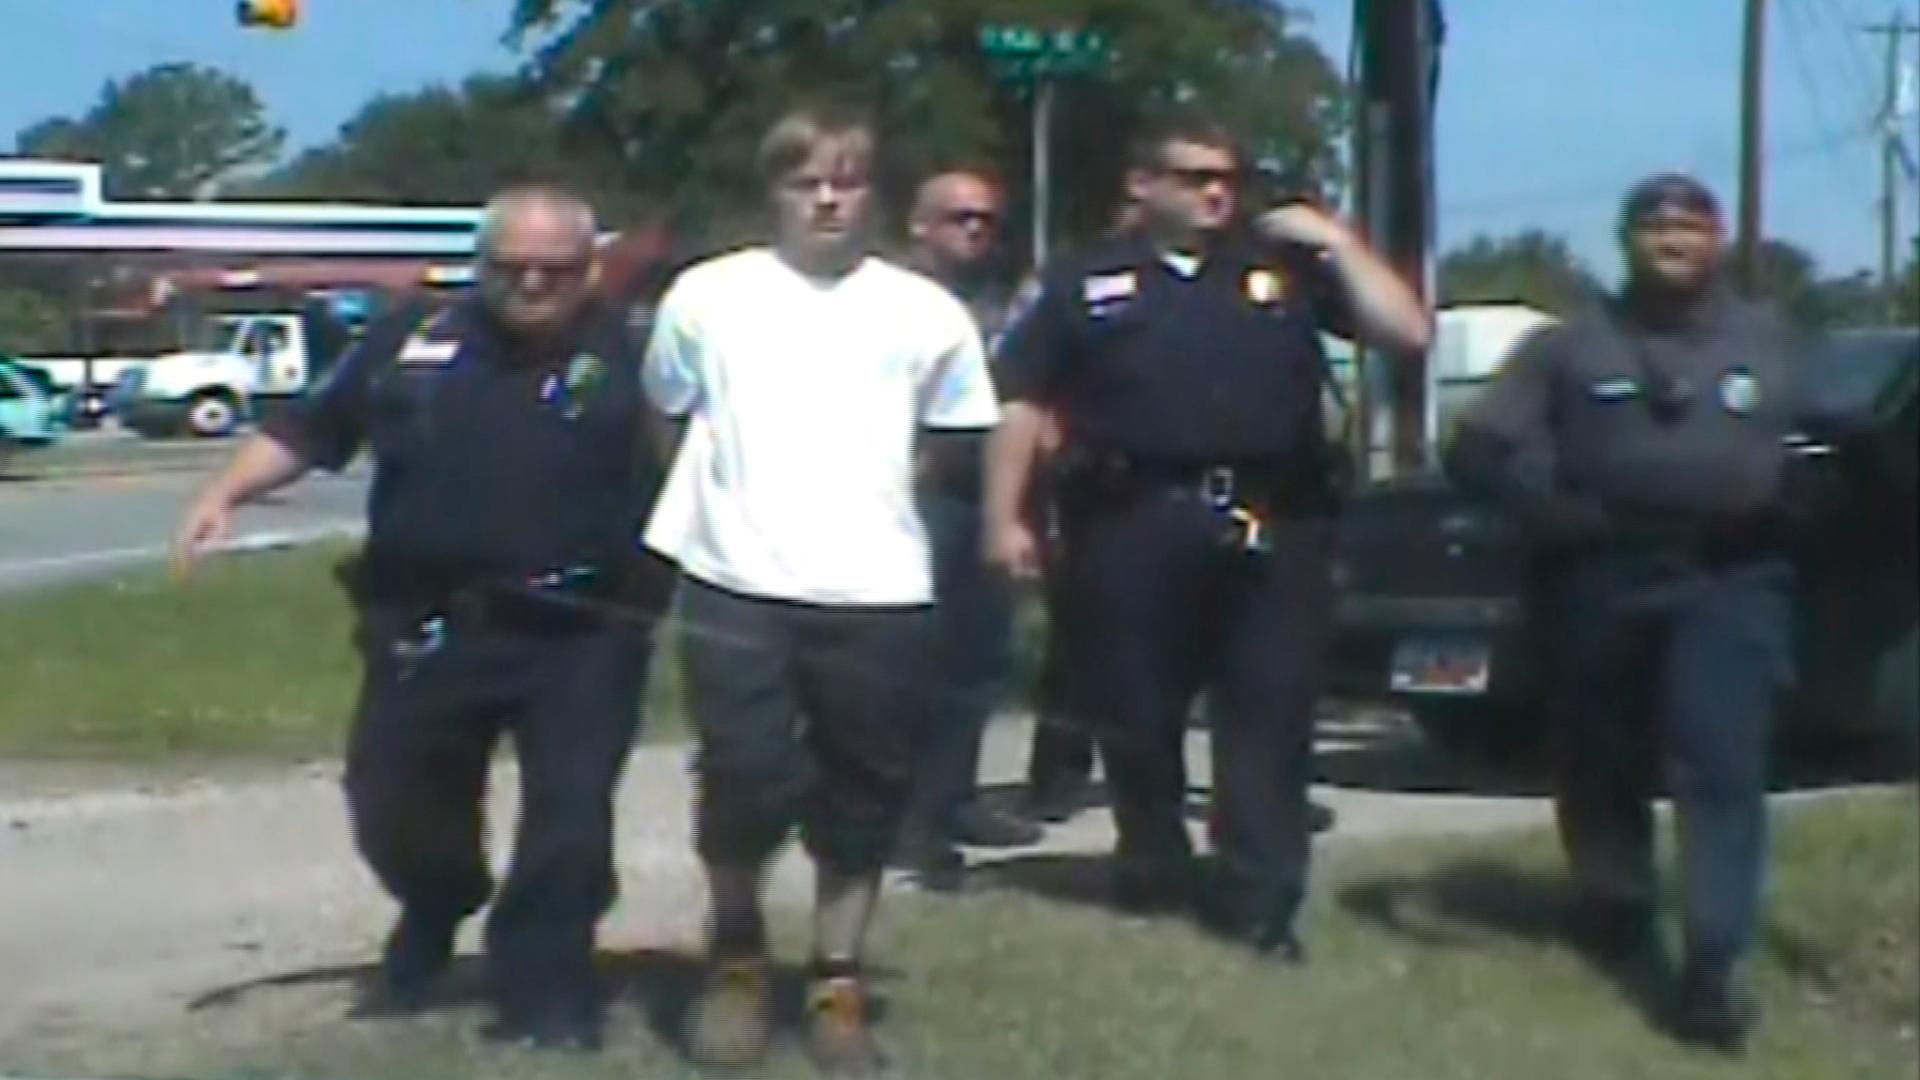 South Carolina shooting suspect Dylann Roof (C) is escorted by police after being detained in Shelby, North Carolina June 18, in this still image from a dash cam video released by the Shelby Police Department June 23, 2015.